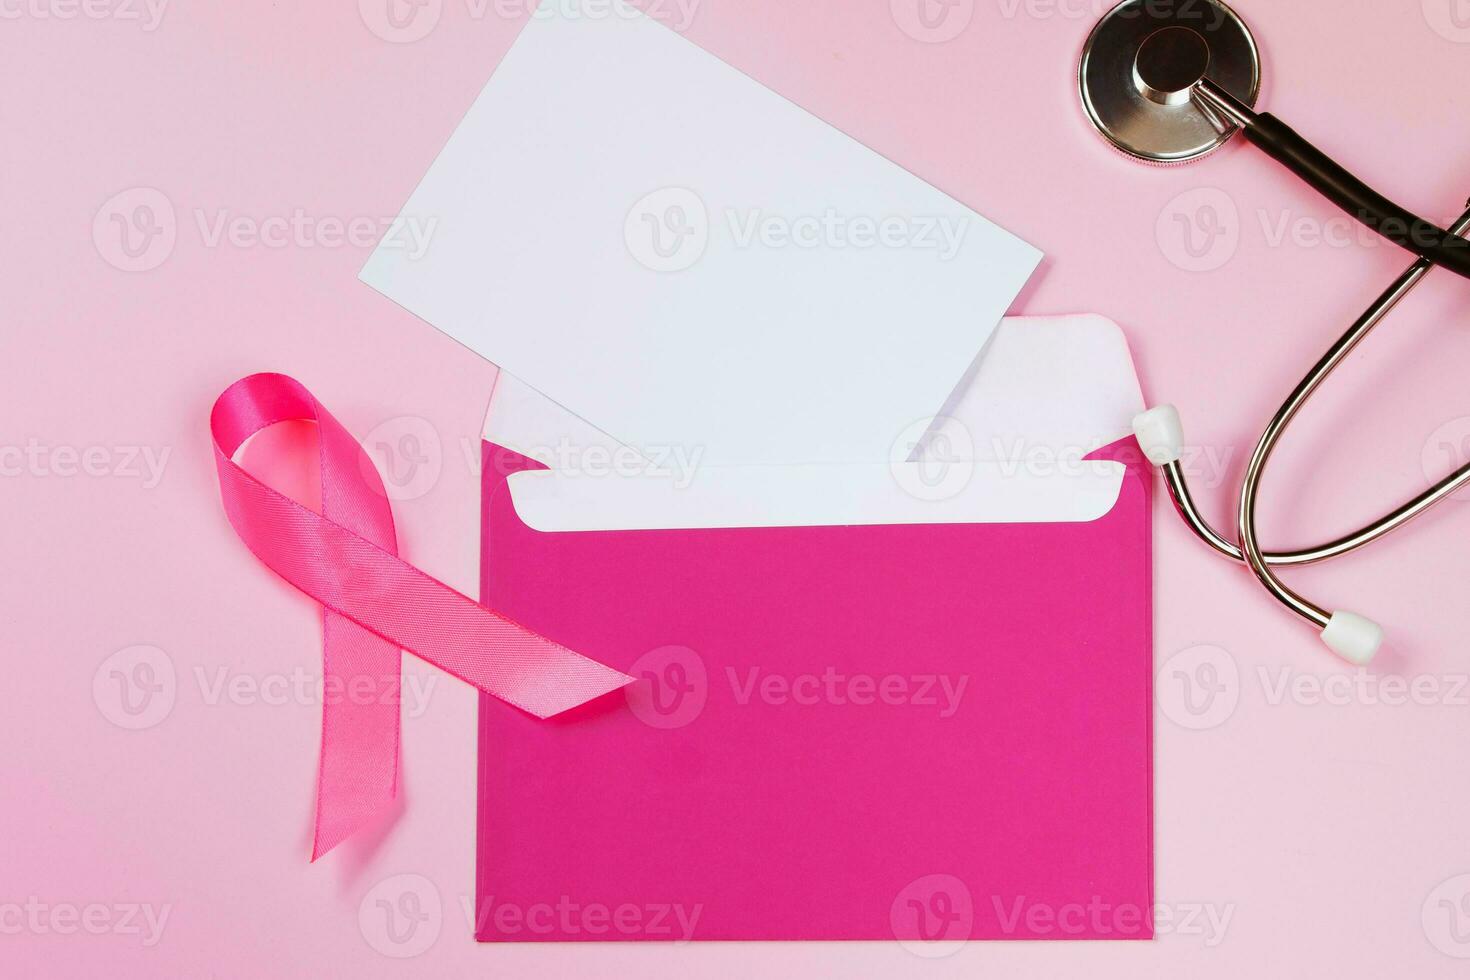 Breast Cancer Awareness Month. Women's health care concept. Pink ribbon and stethoscope on colored background. Envelope mockup. photo